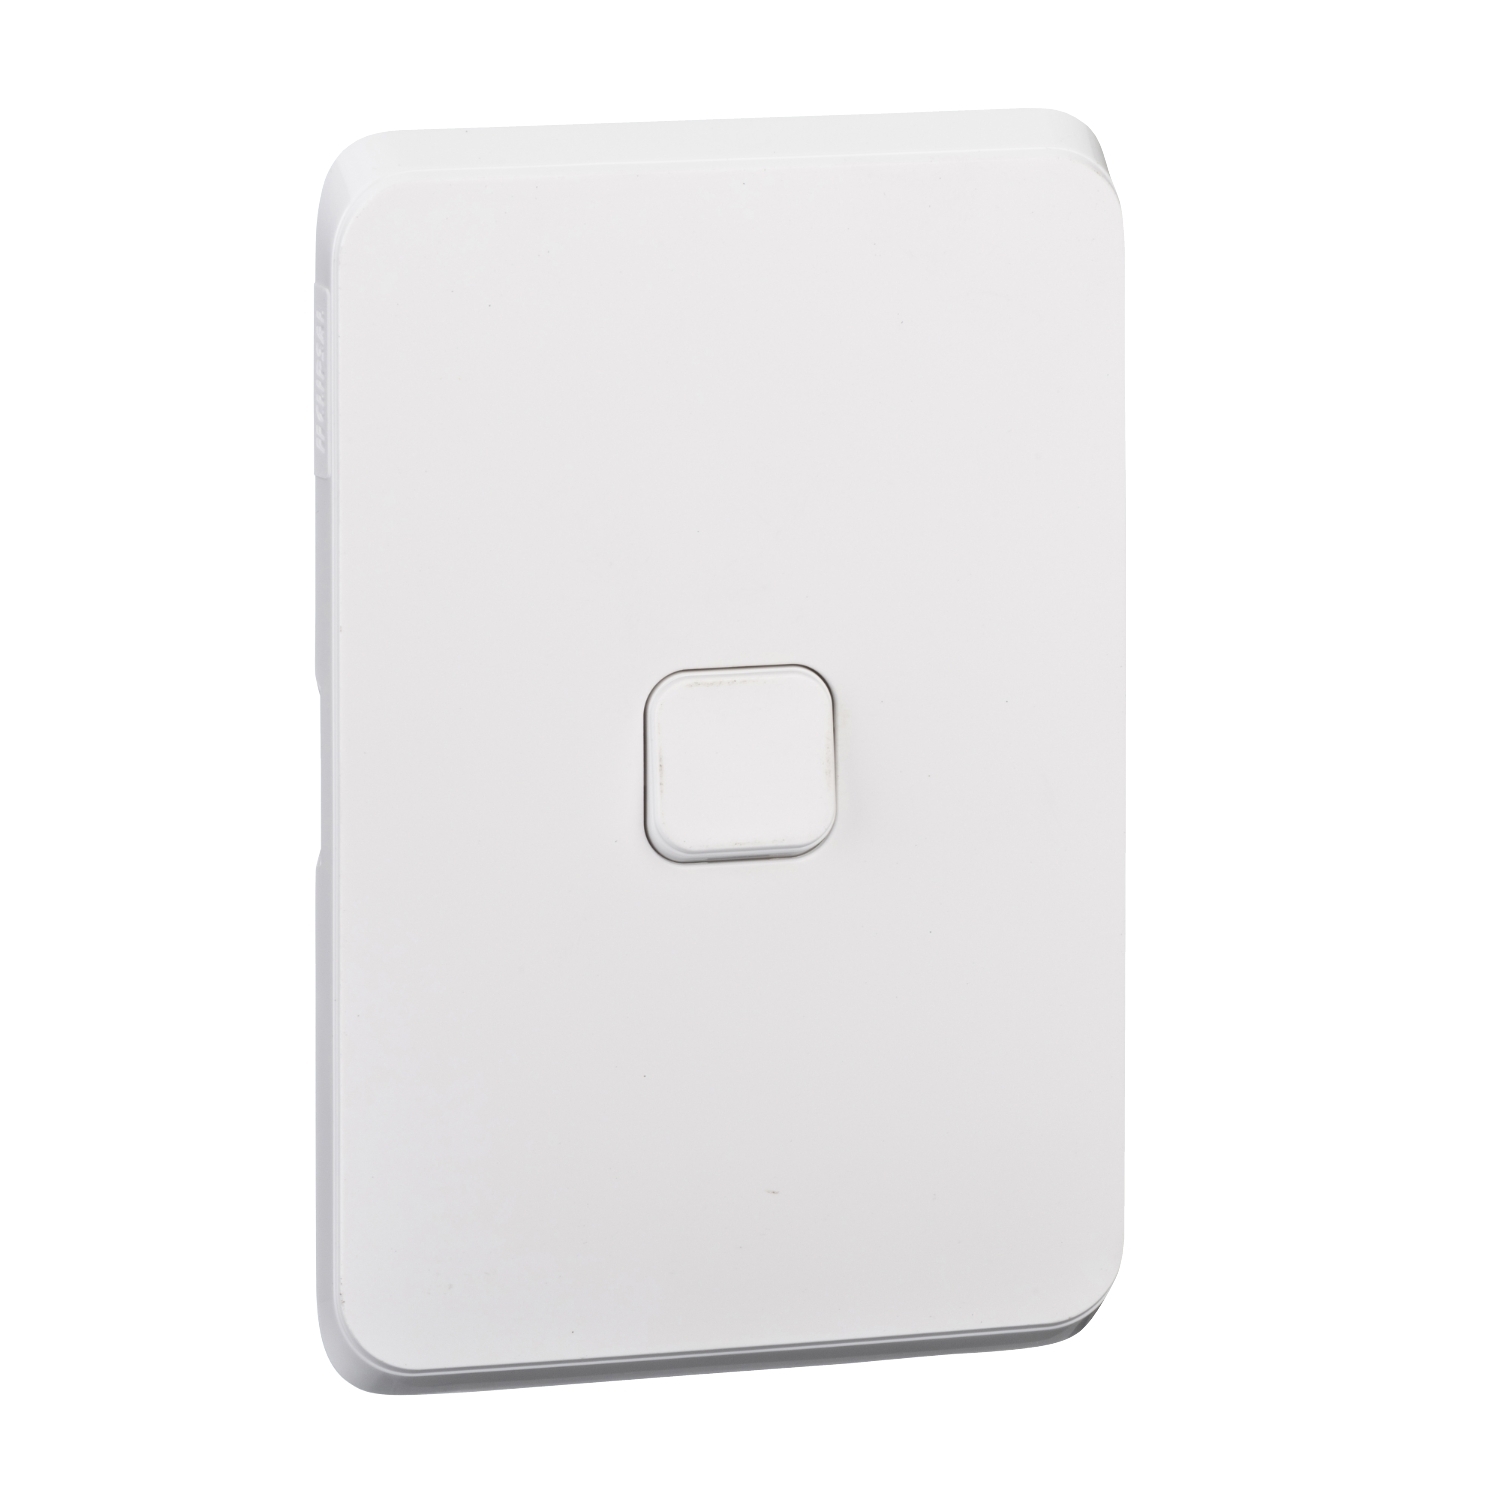 PDL Iconic - Cover Plate Switch 1-Gang - Solid White